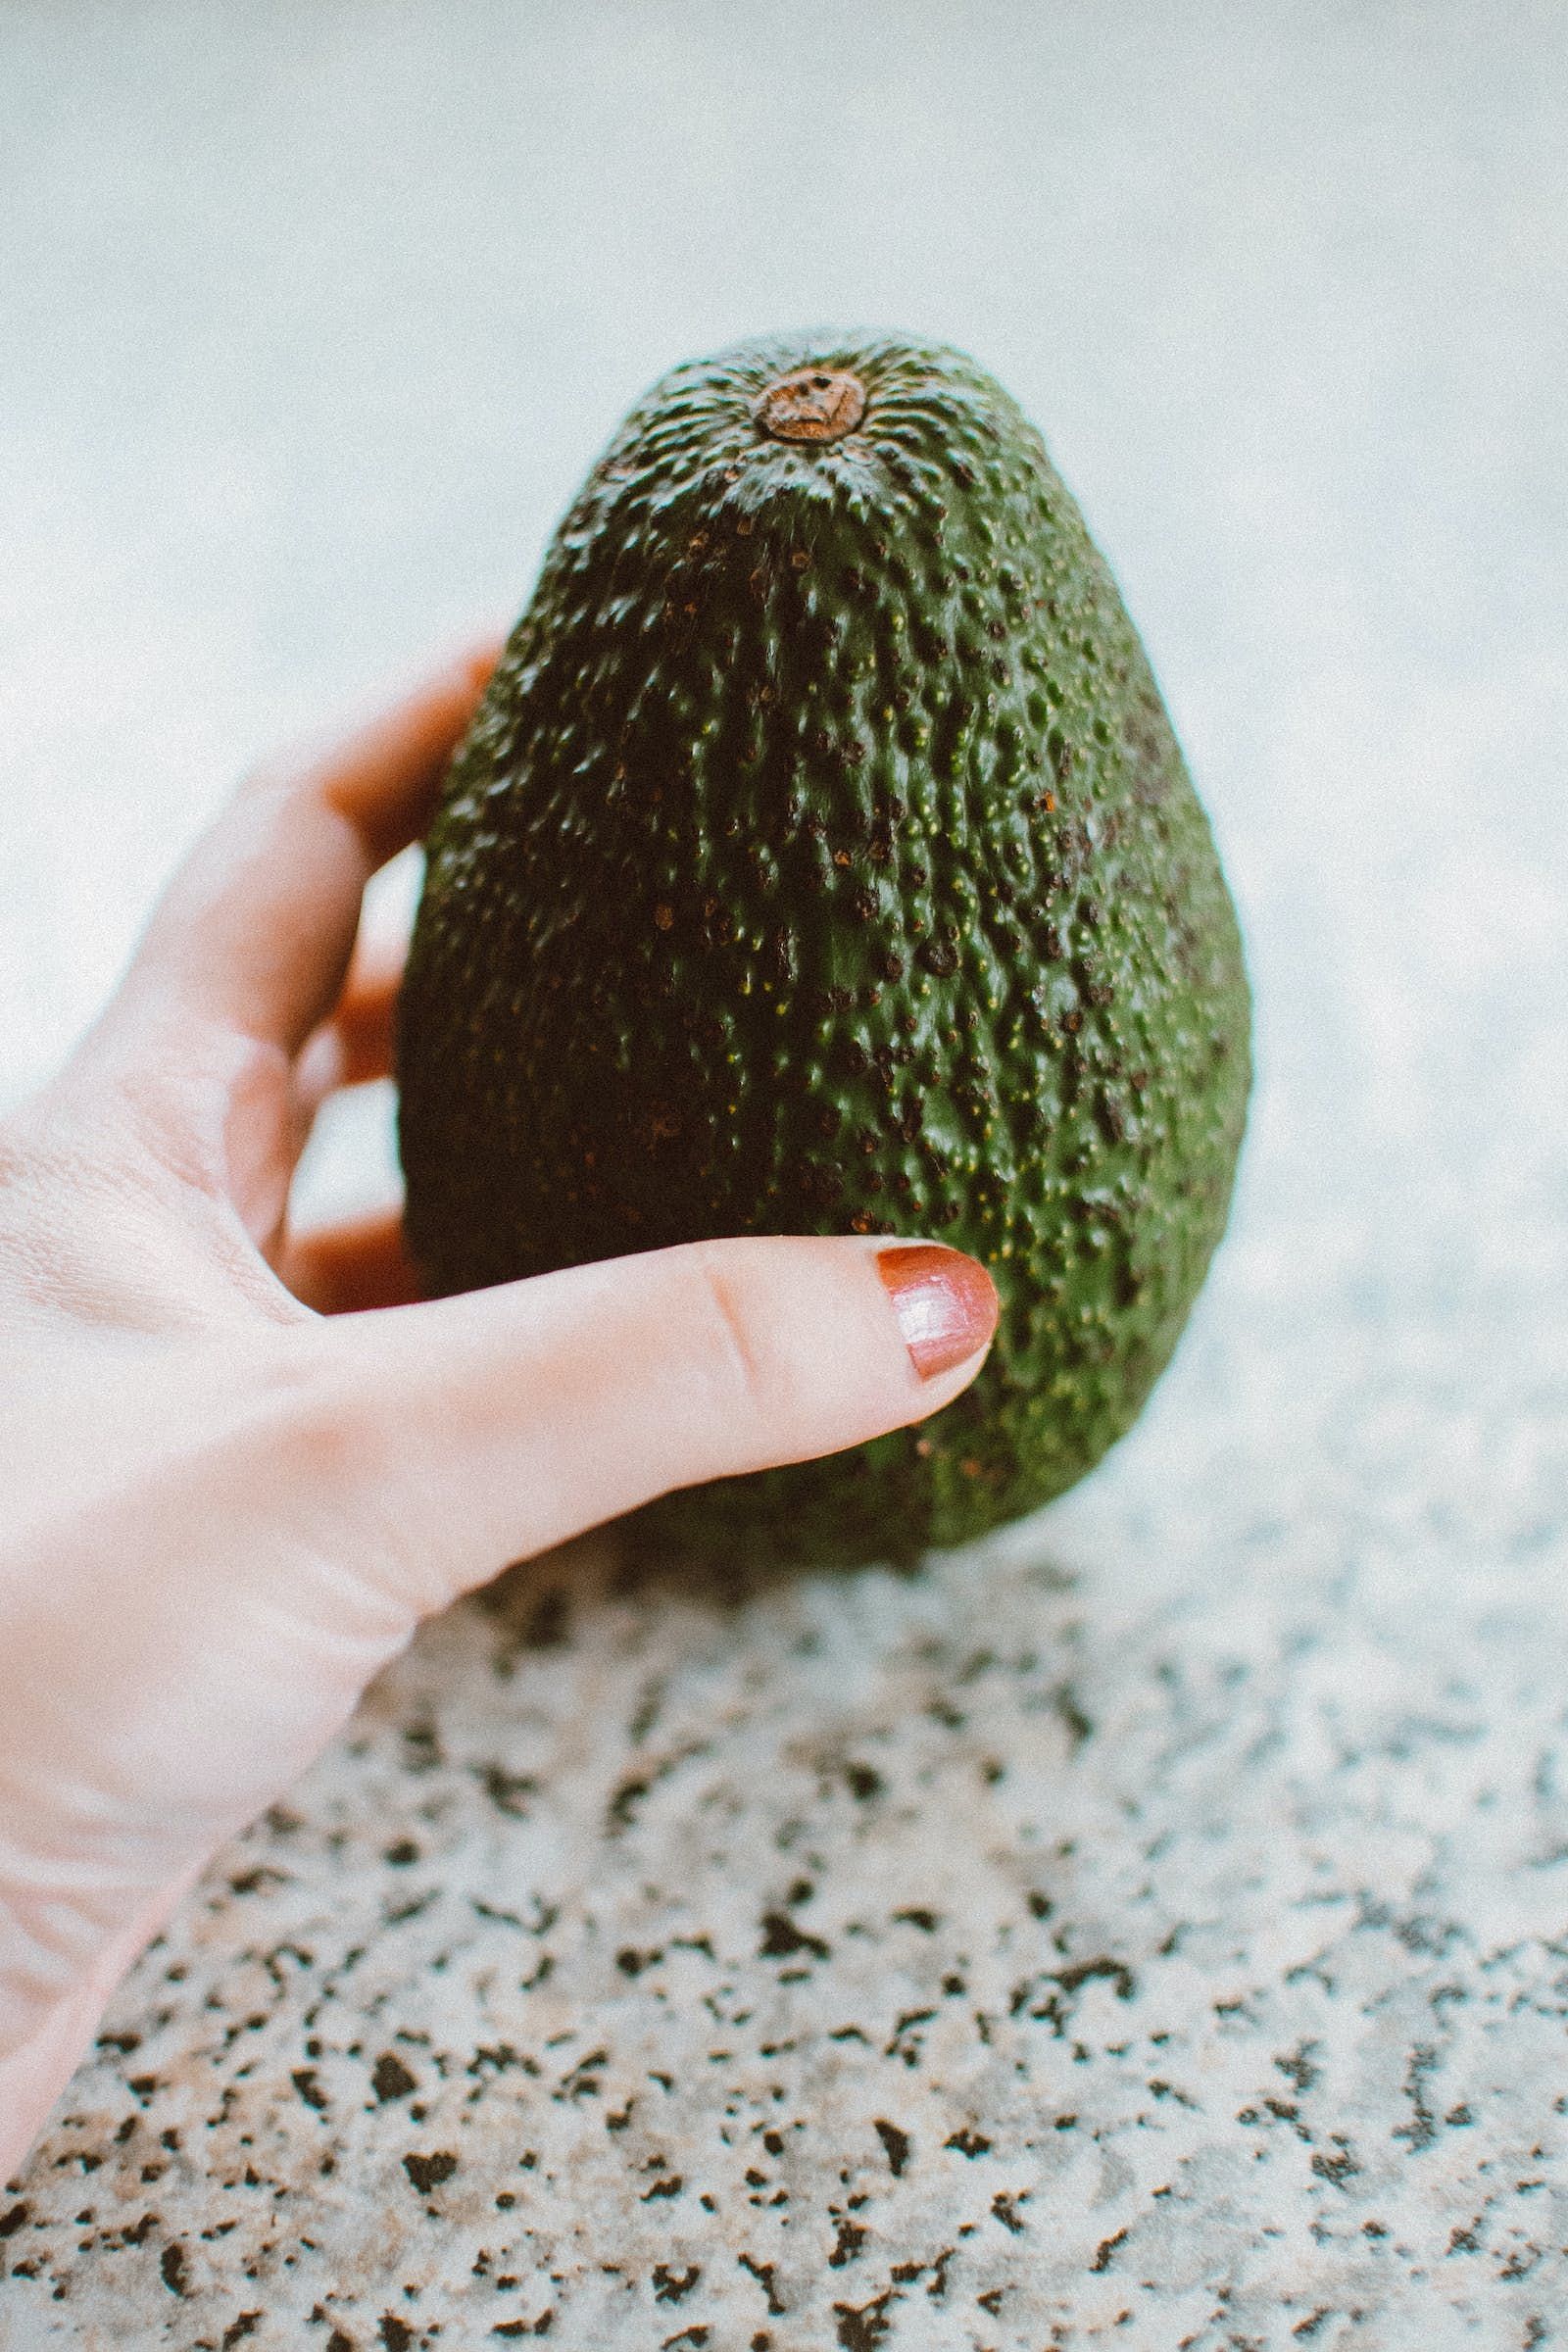 Avocado is a great source of fiber. (Image source: Pexels)